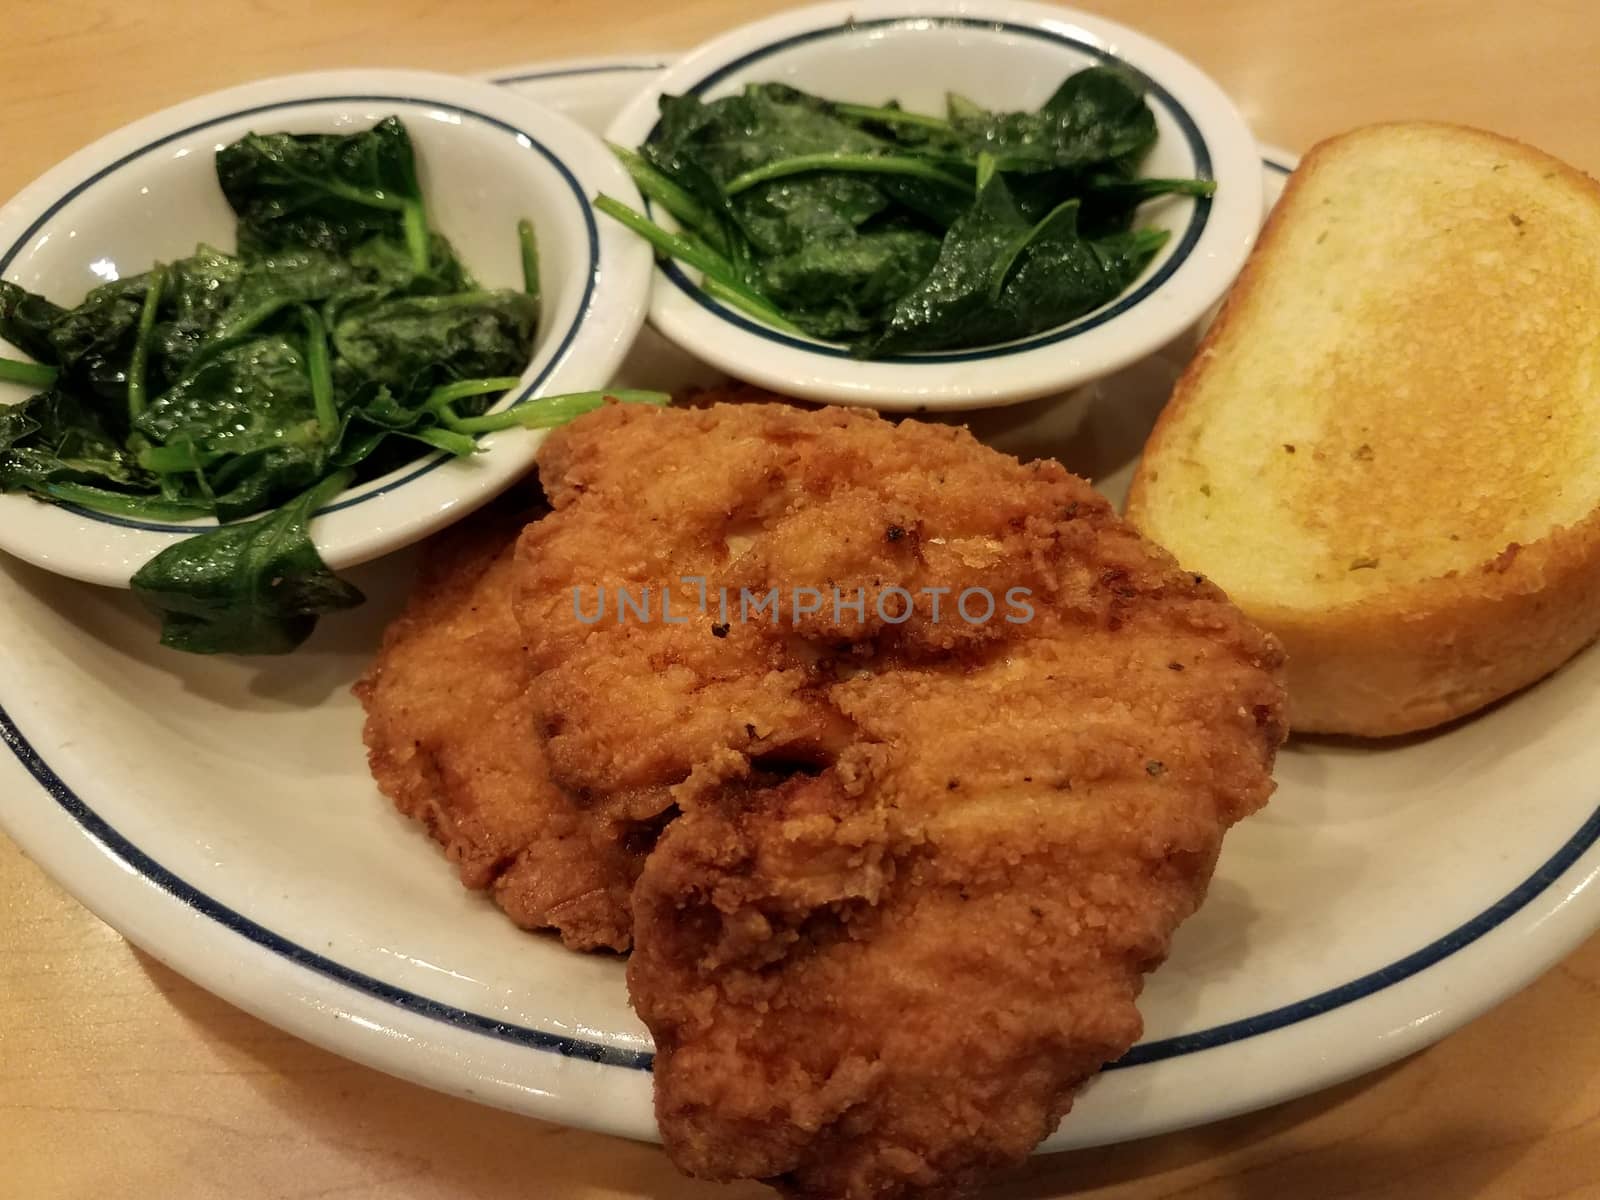 fried chicken and spinach on plate on wood table by stockphotofan1